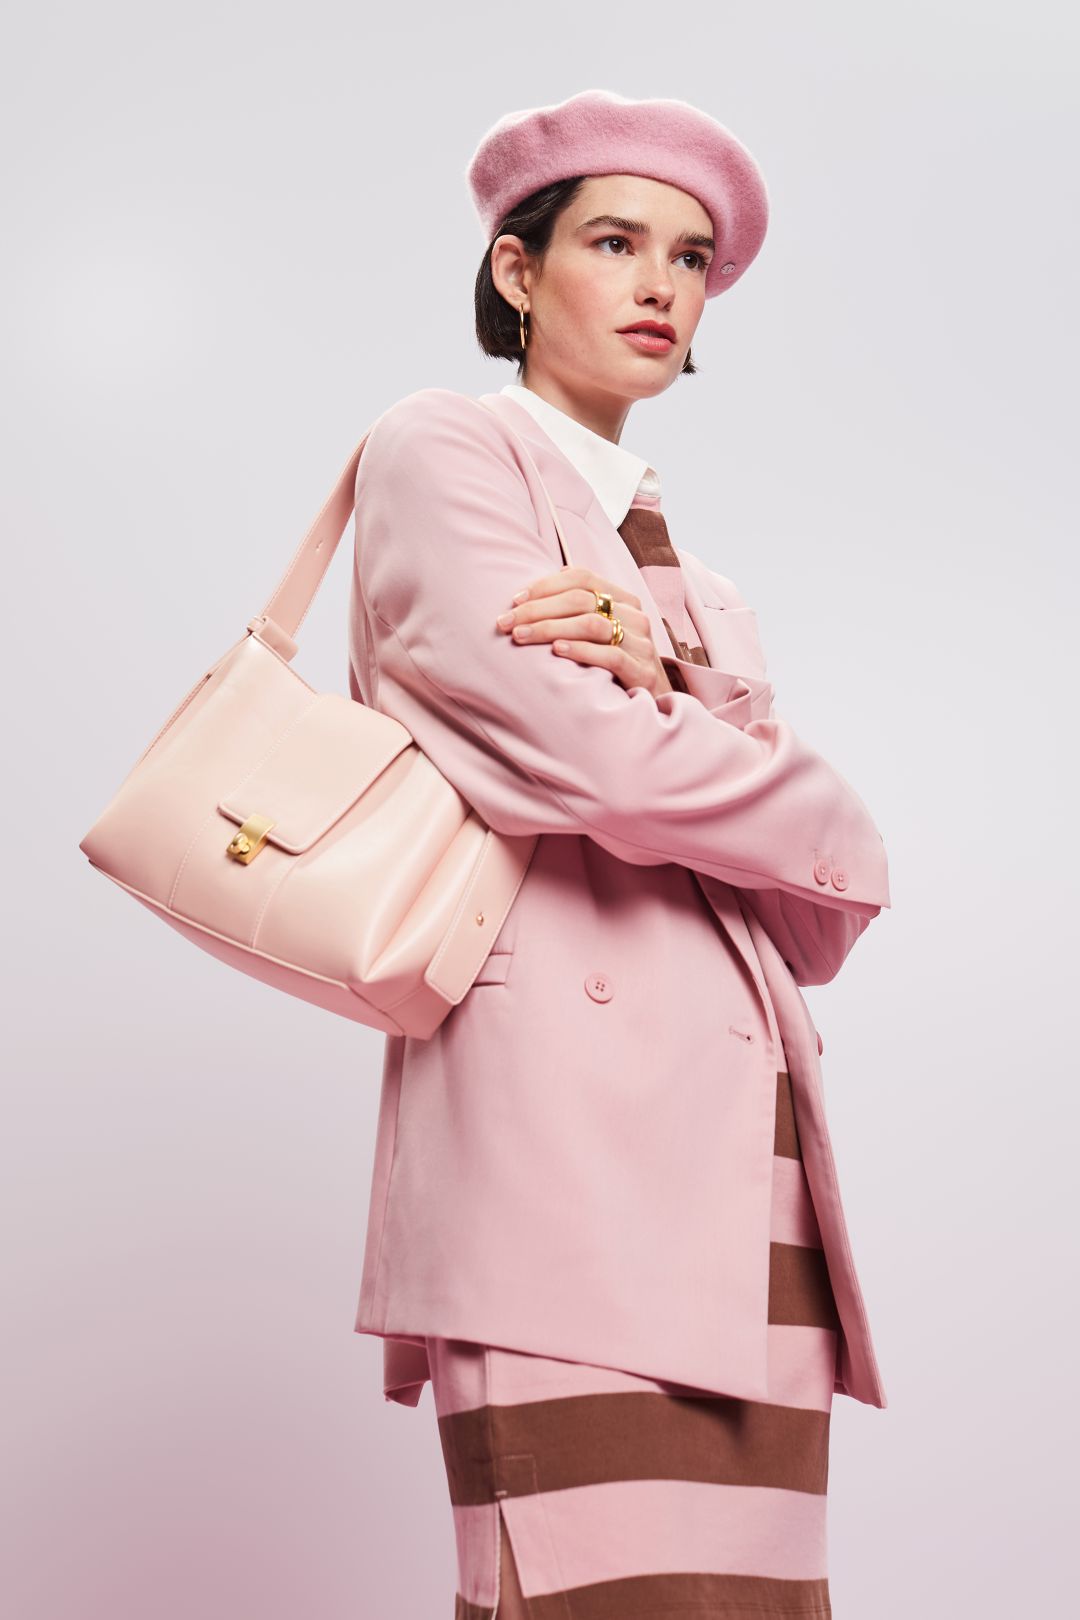 Shoulder Bag in Pink for Woman from Esprit GOOFASH